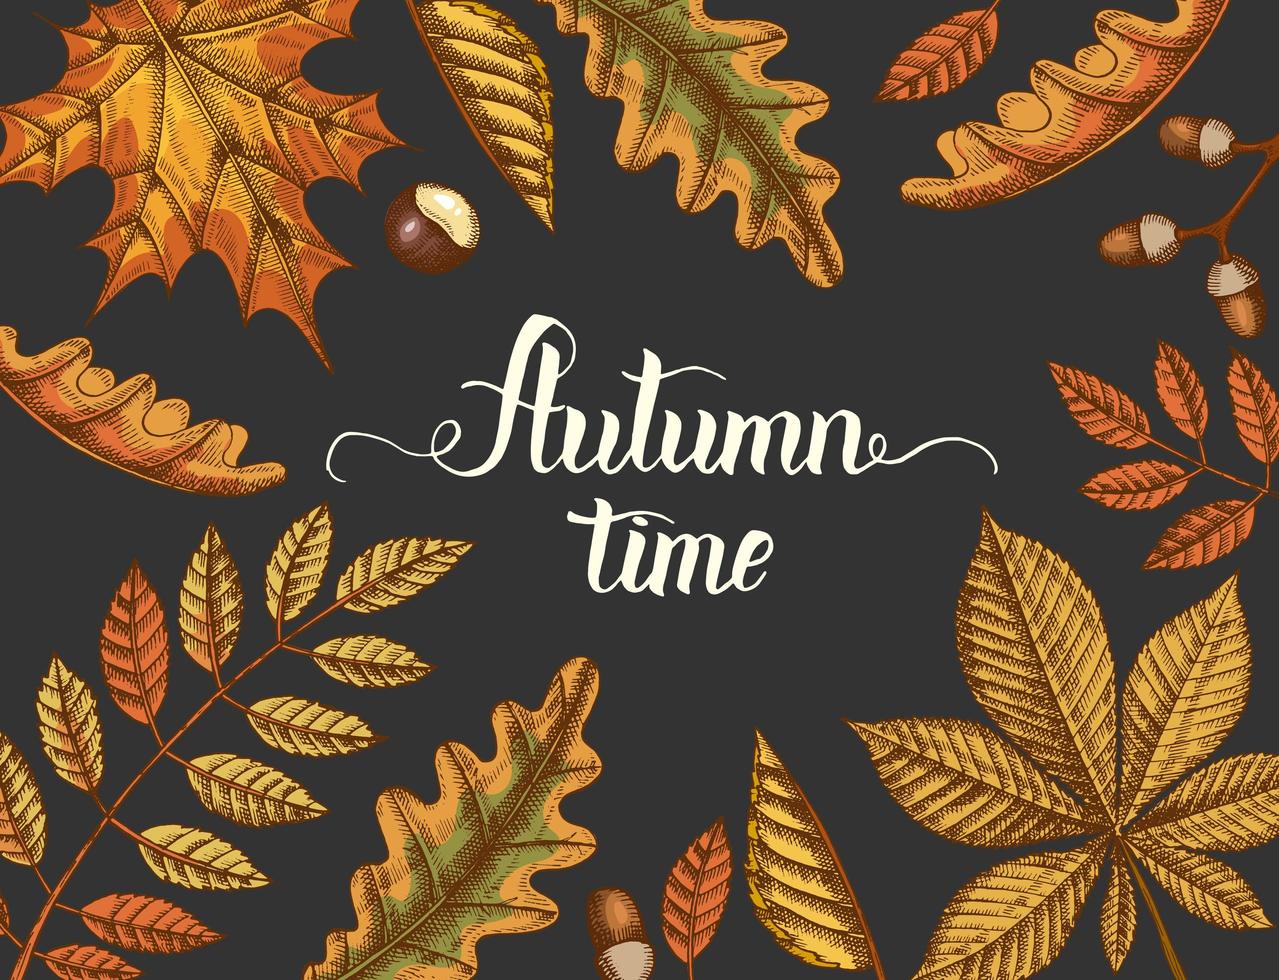 Autumn time calligraphy lettering with vintage leaves vector